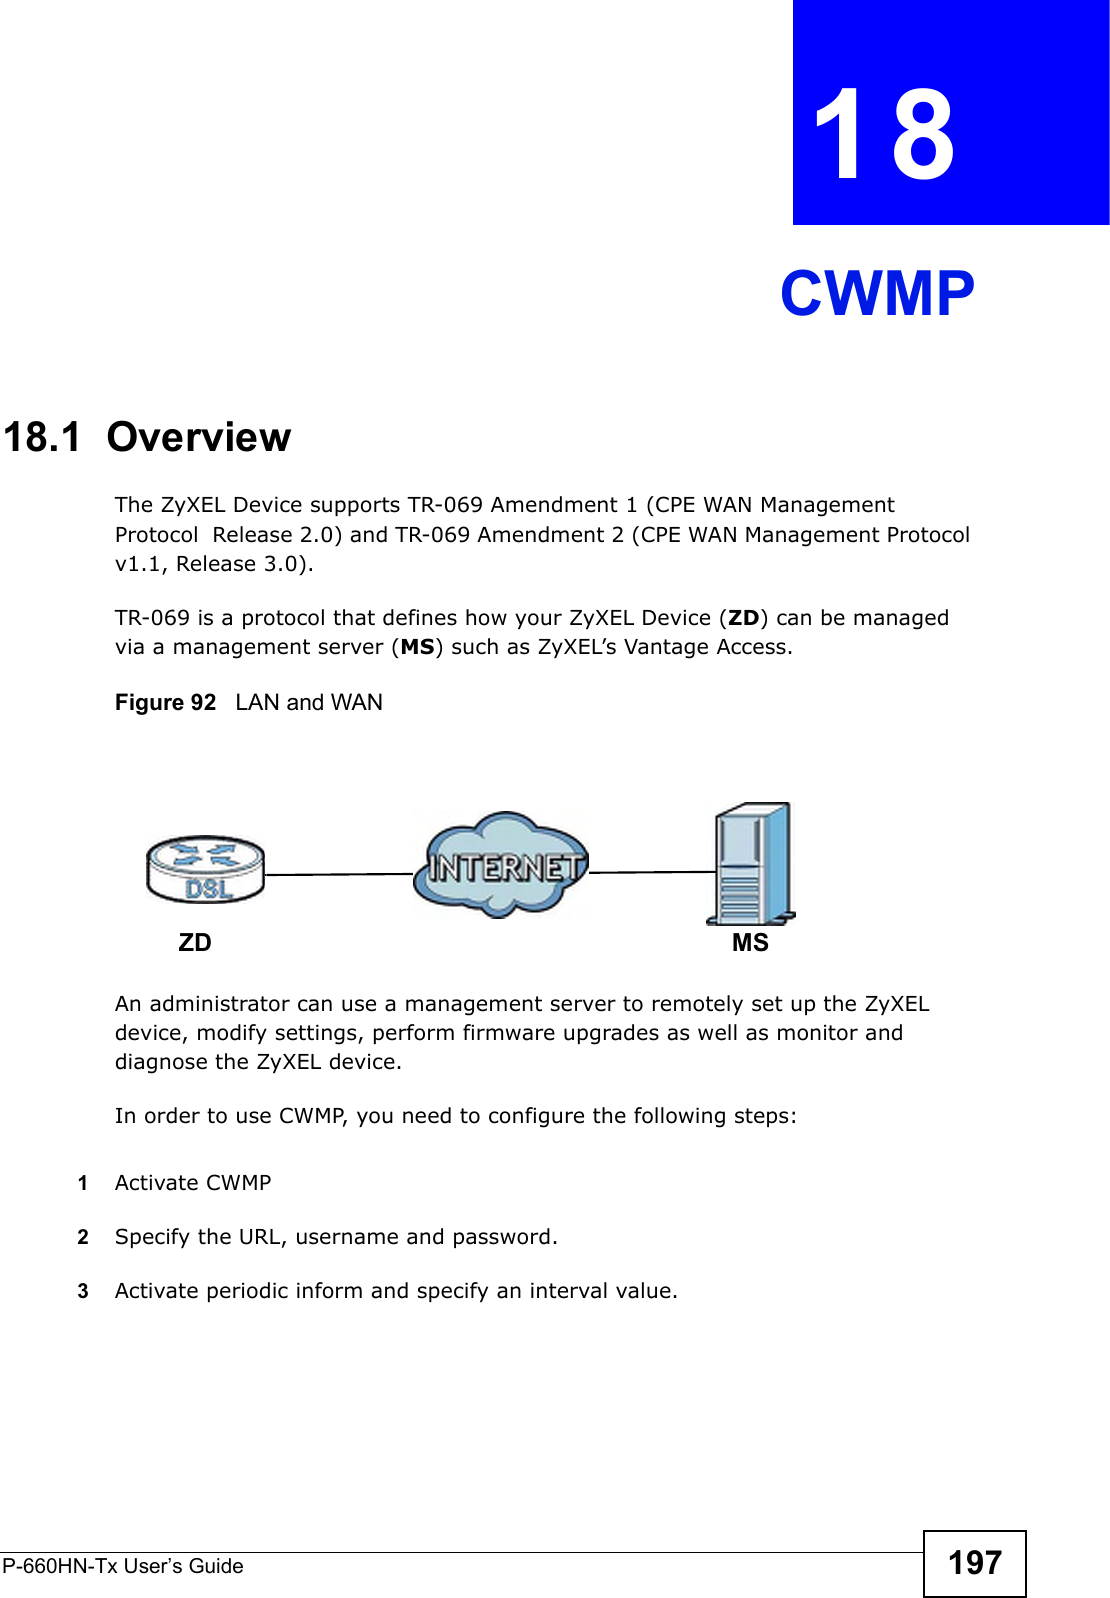 P-660HN-Tx User’s Guide 197CHAPTER  18 CWMP18.1  OverviewThe ZyXEL Device supports TR-069 Amendment 1 (CPE WAN Management Protocol  Release 2.0) and TR-069 Amendment 2 (CPE WAN Management Protocol v1.1, Release 3.0).TR-069 is a protocol that defines how your ZyXEL Device (ZD) can be managed via a management server (MS) such as ZyXEL’s Vantage Access. Figure 92   LAN and WANAn administrator can use a management server to remotely set up the ZyXEL device, modify settings, perform firmware upgrades as well as monitor and diagnose the ZyXEL device. In order to use CWMP, you need to configure the following steps:1Activate CWMP2Specify the URL, username and password.3Activate periodic inform and specify an interval value.MSZD